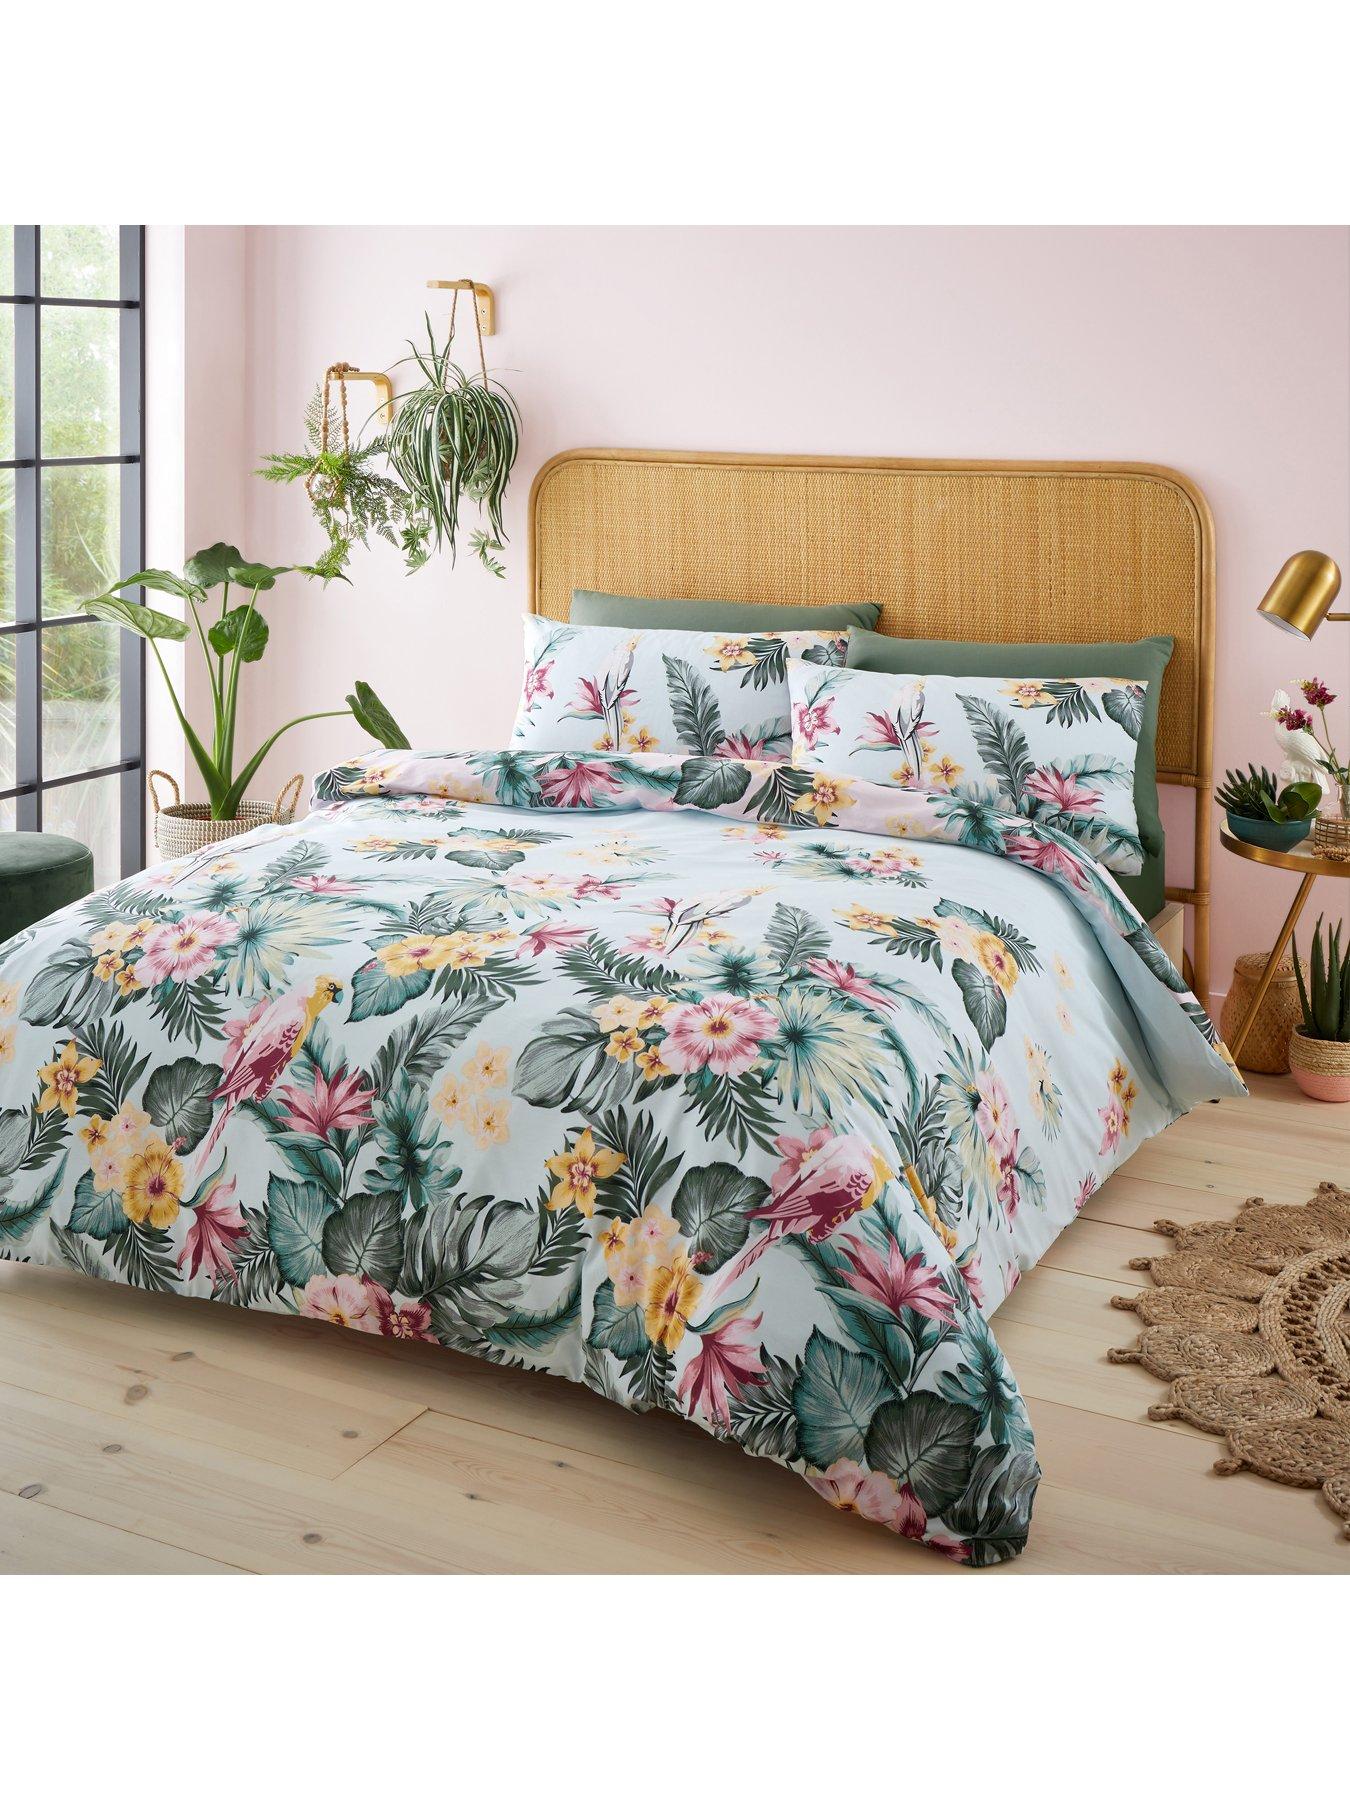 Details about   Floral Red Cream Duvet Set Reversible Bedding Curtain Sheet Catherine Lansfield 